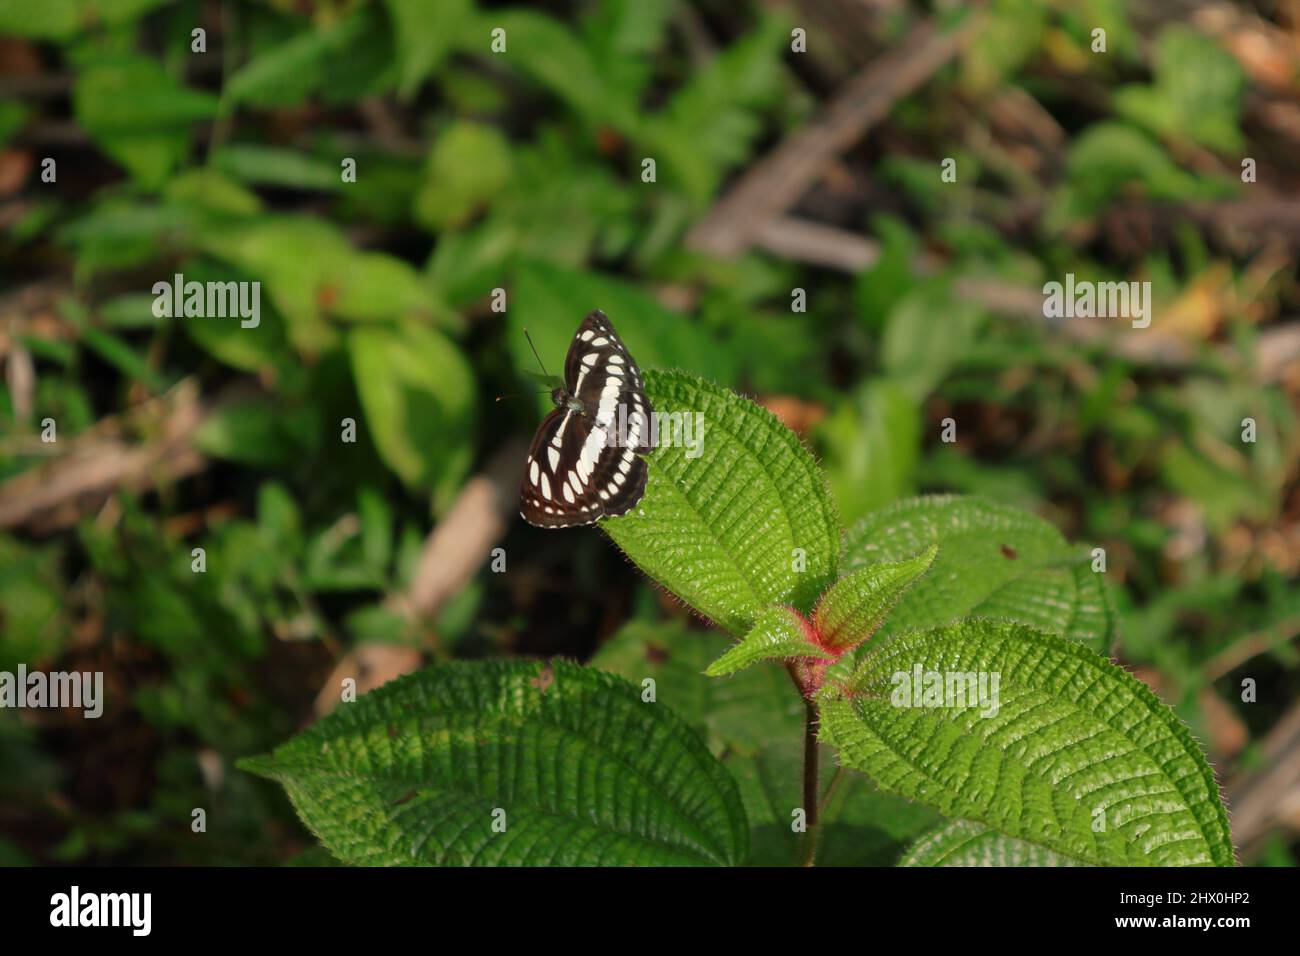 A Common Sailer butterfly resting on top of a Miconia Crenata weed plant leaf tip Stock Photo